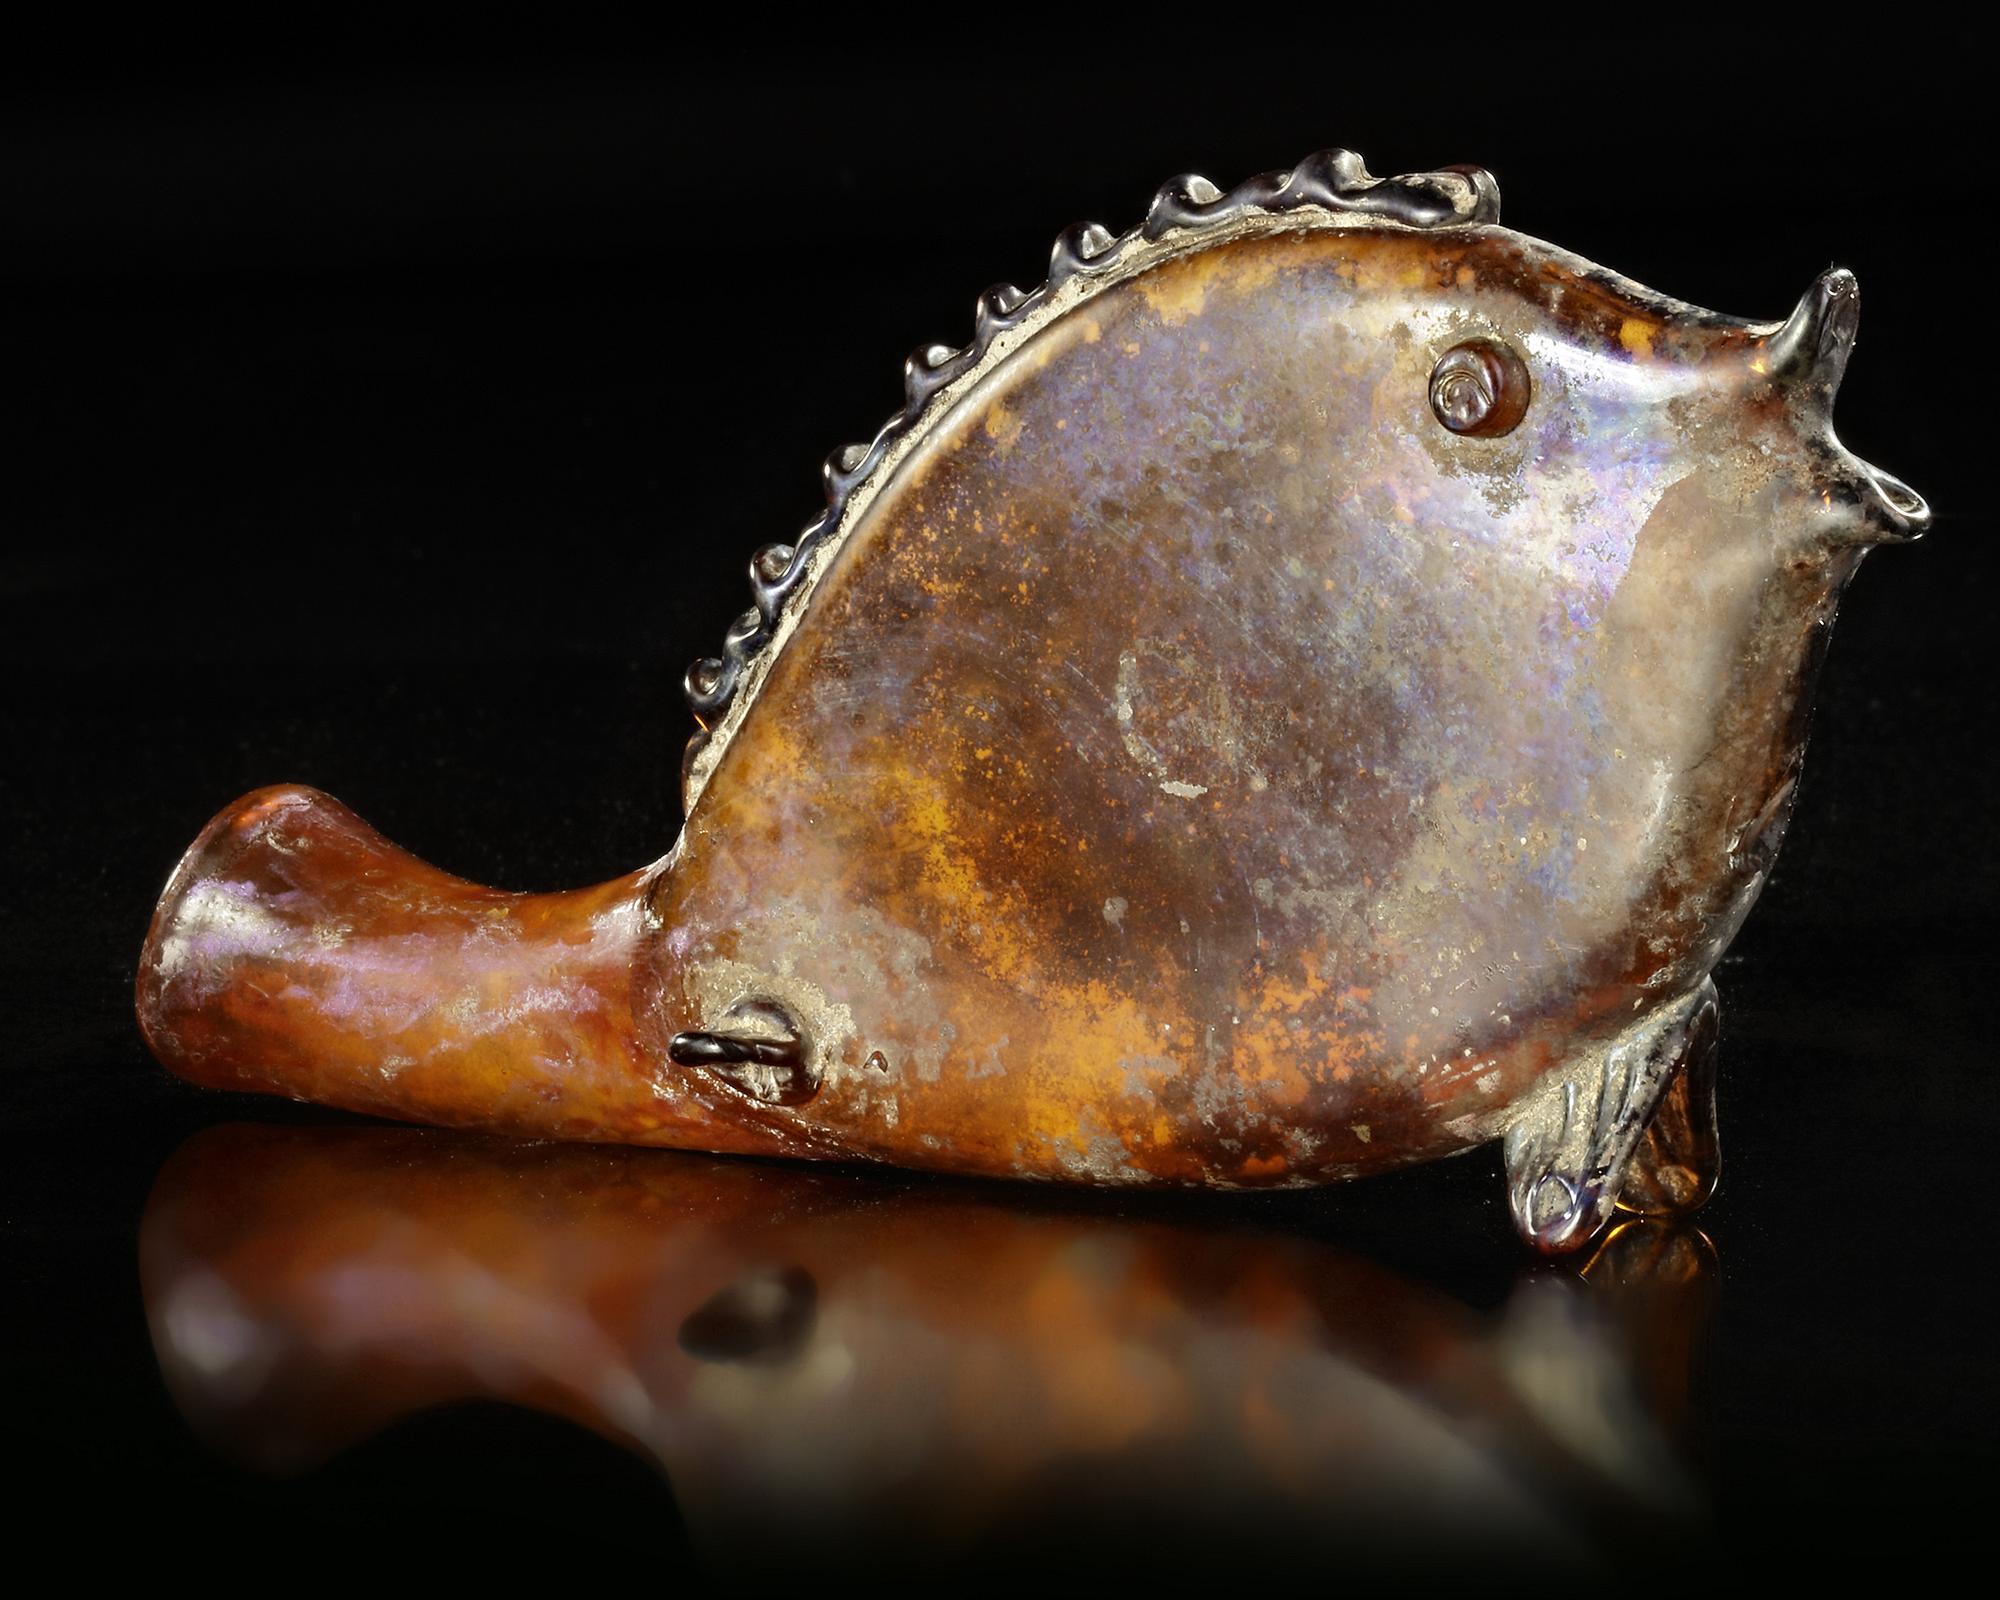 A ROMAN GLASS FLASK IN THE FORM OF A FISH, CIRCA 3RD CENTURY A.D. - Image 4 of 5